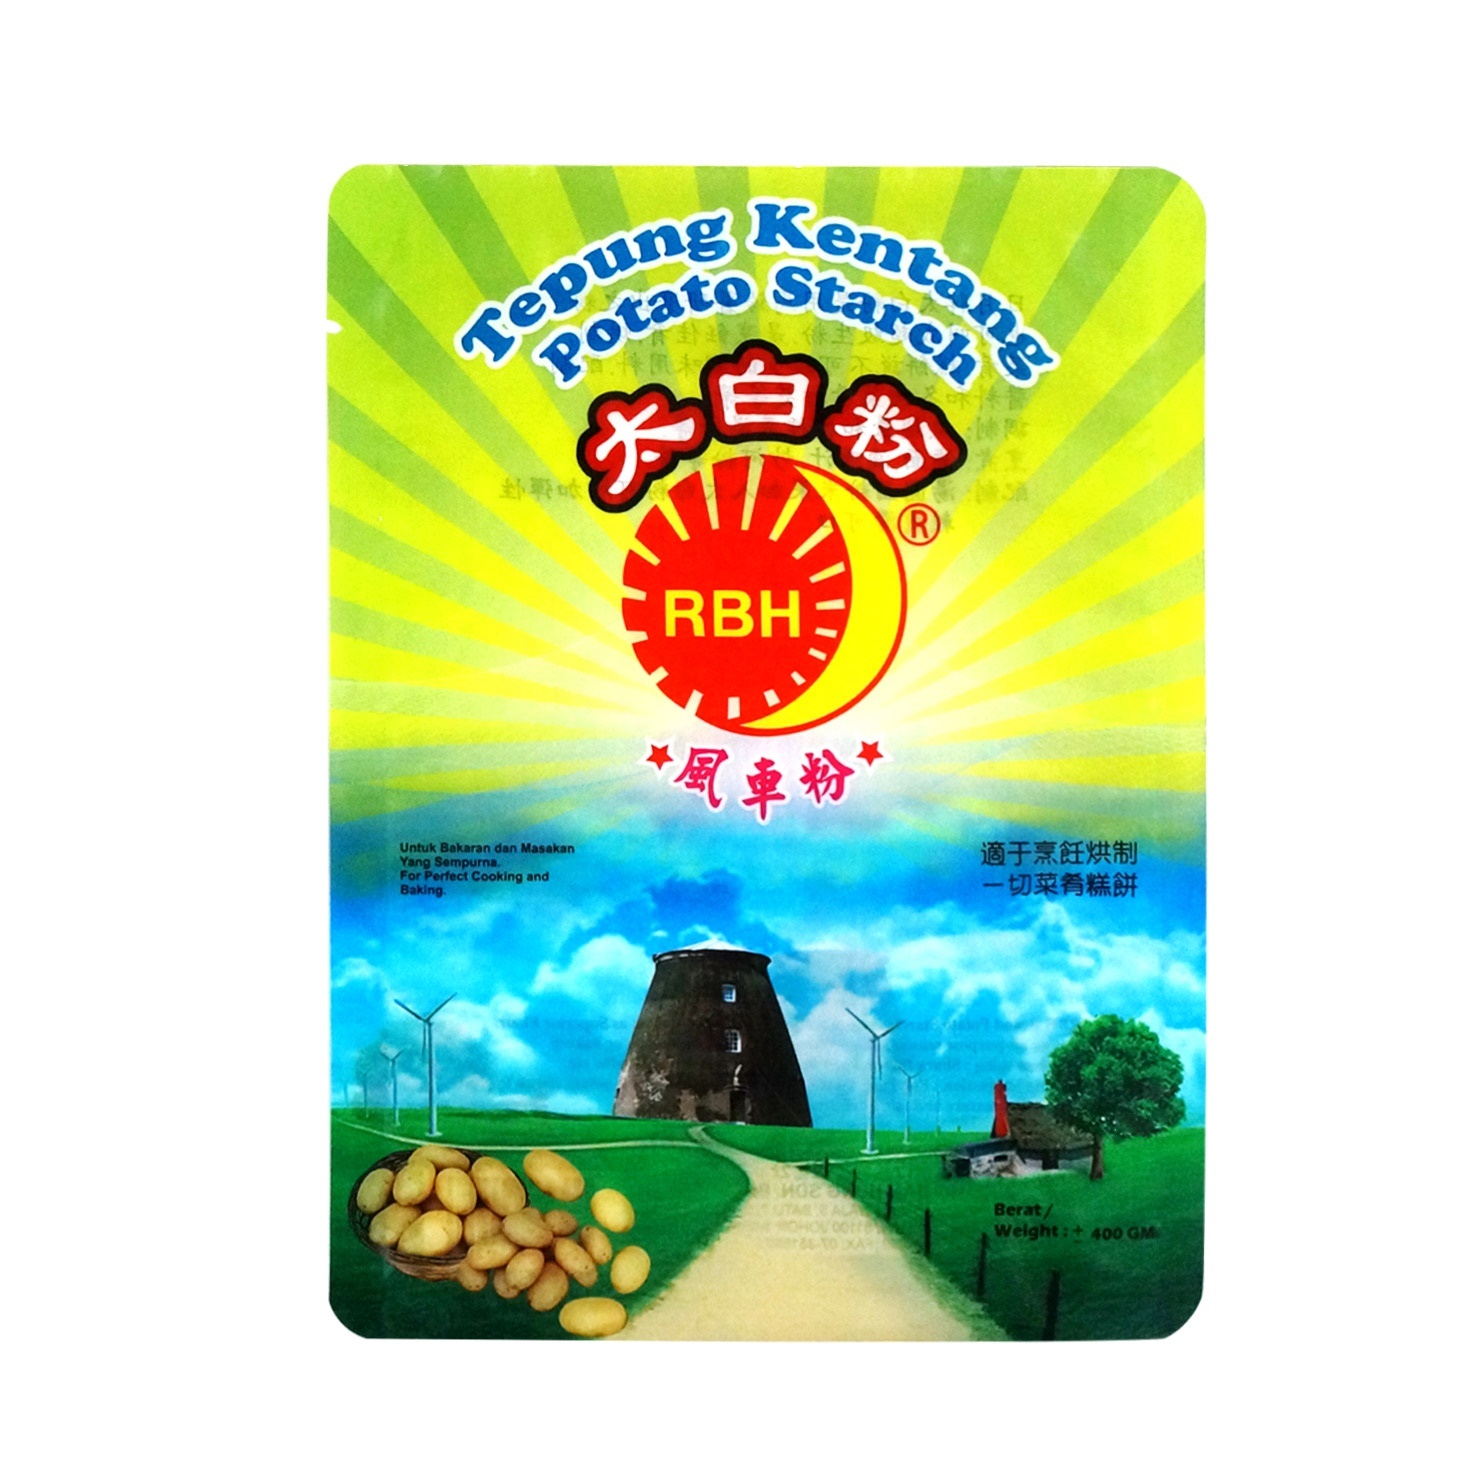 Customized Gravure Printing plastic Pouch packaging for potapo starch three side seal bag